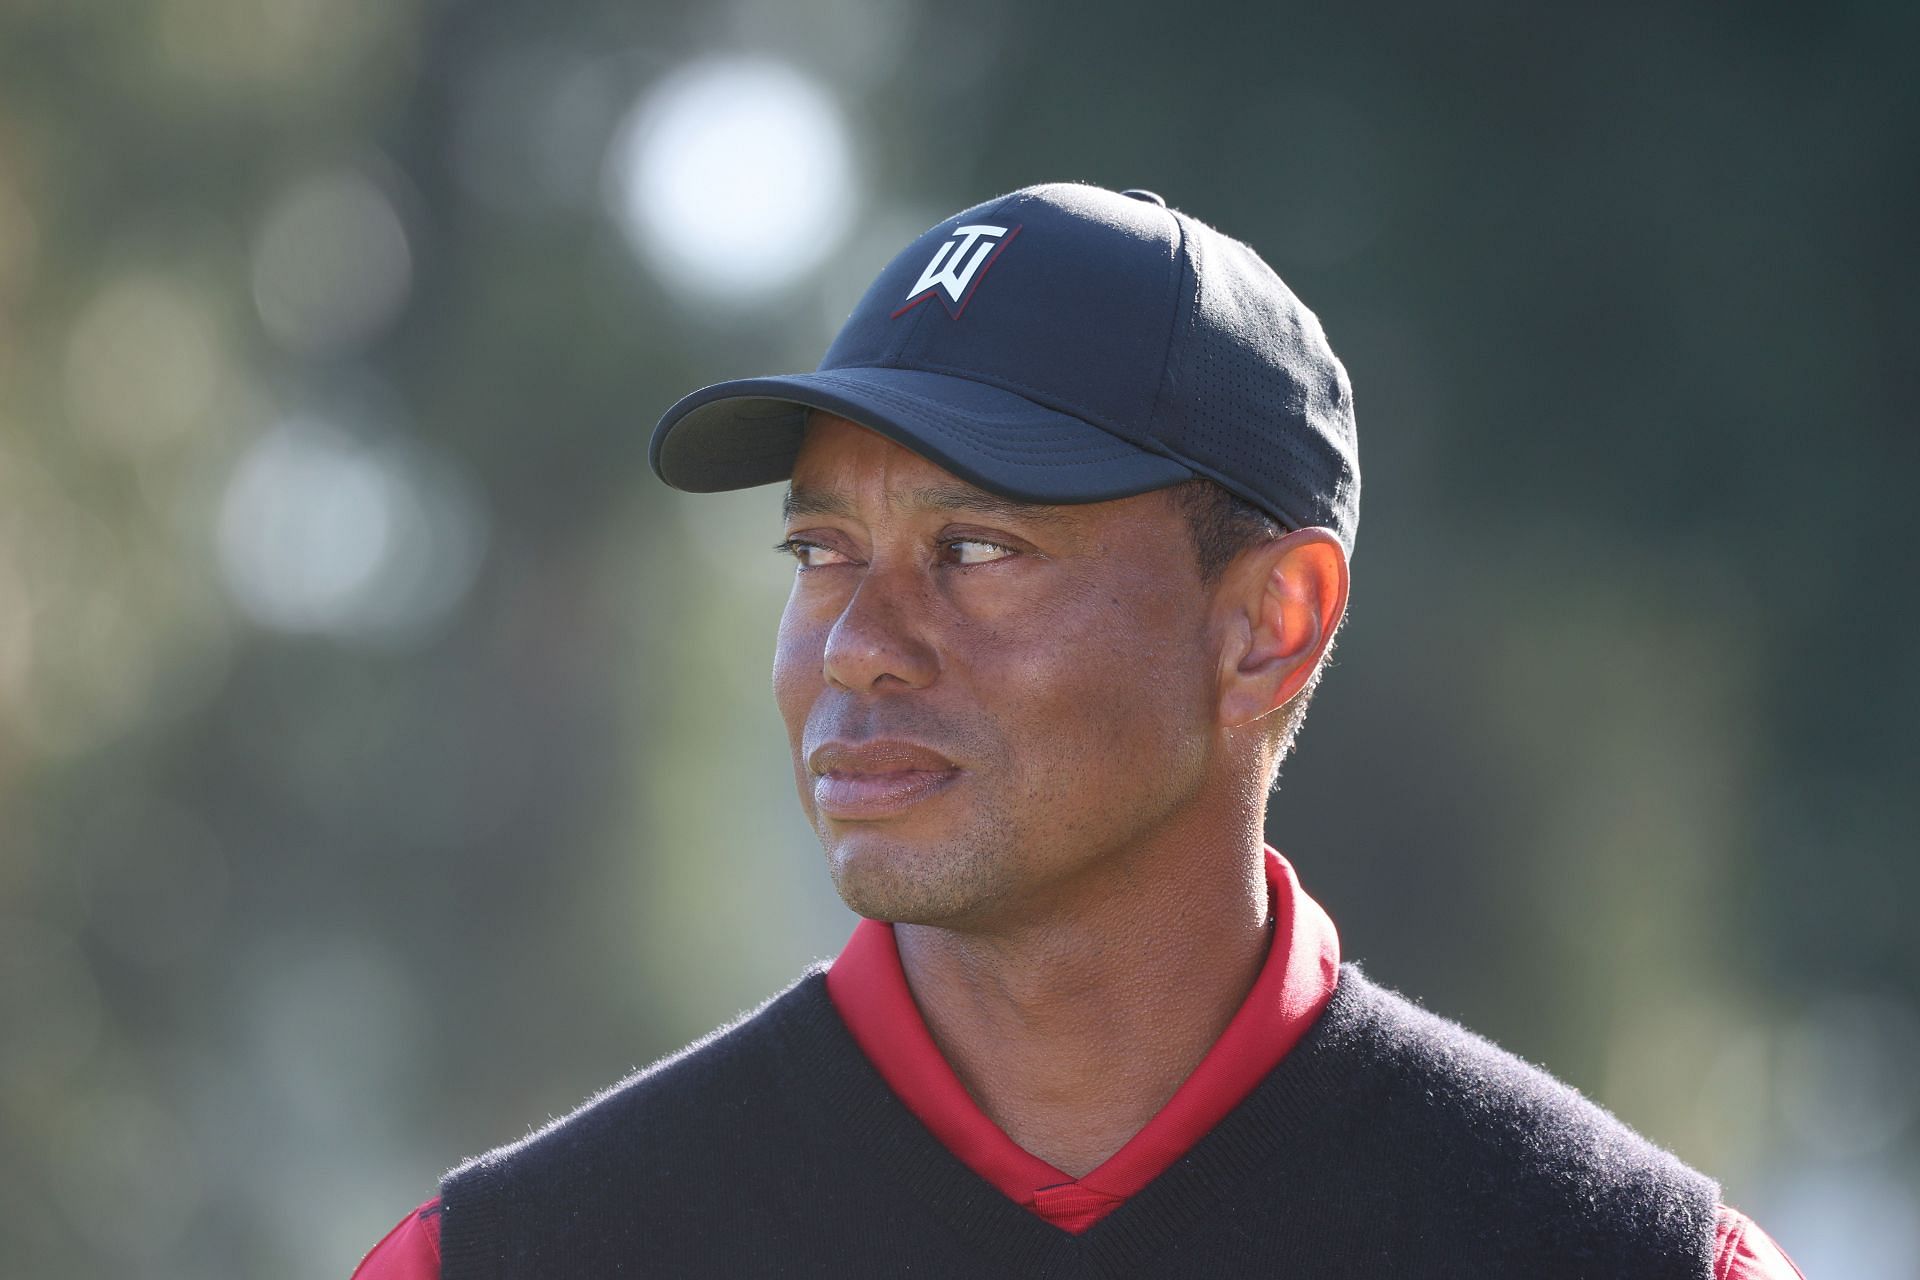 Tiger Woods is under fire